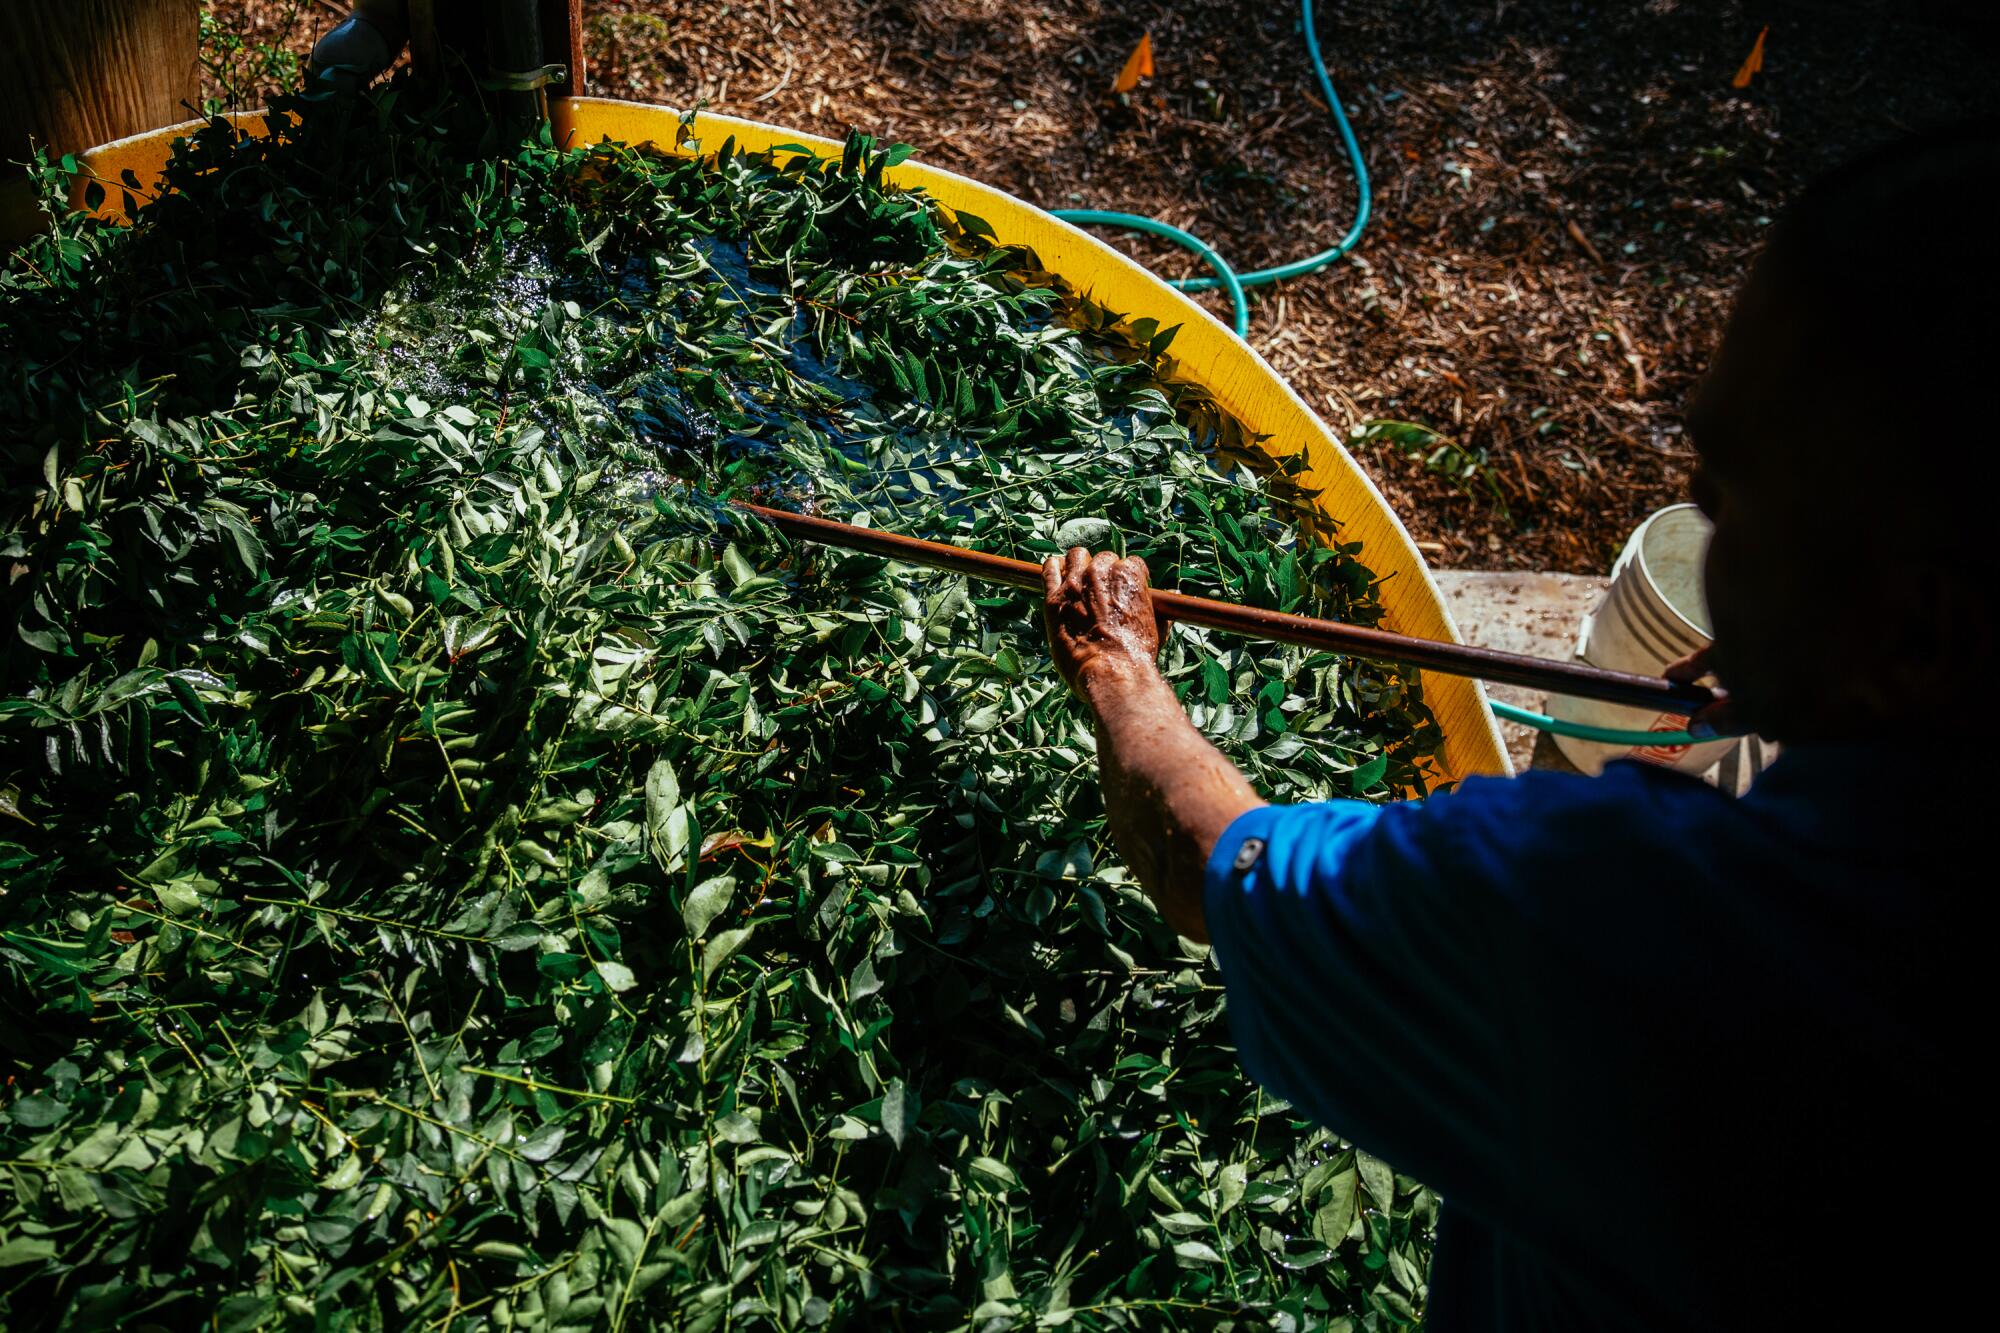 A man stirs leafy branches in a yellow tub of water.